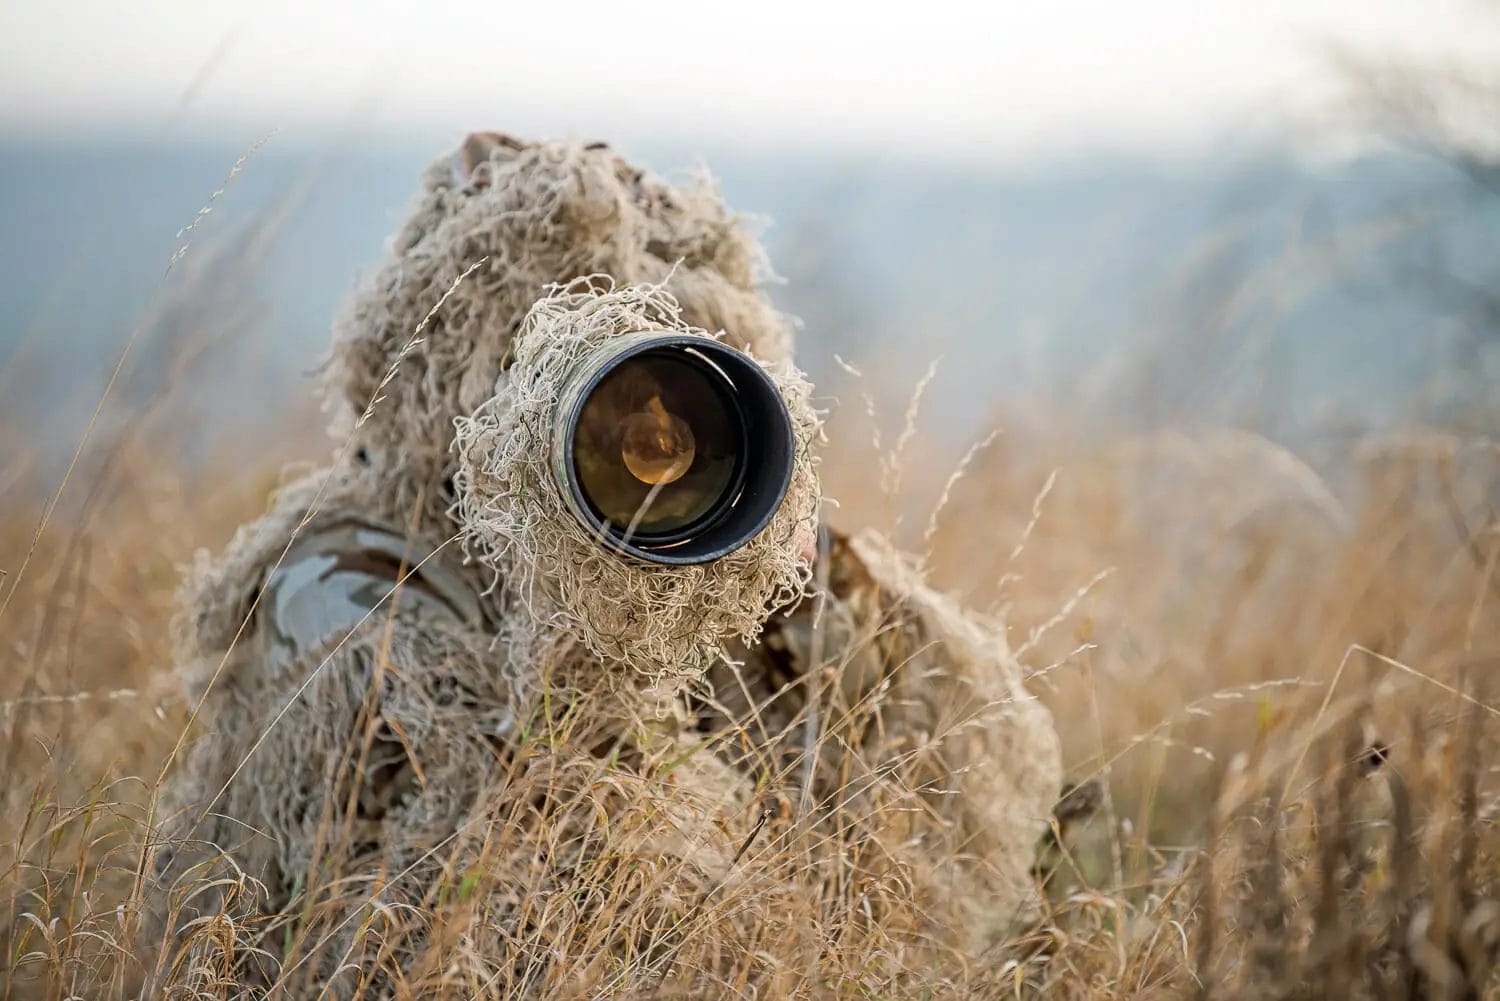 A photographer in a ghillie suit using a long lens camera in dry grassland, camouflaged to blend in with the natural surroundings.